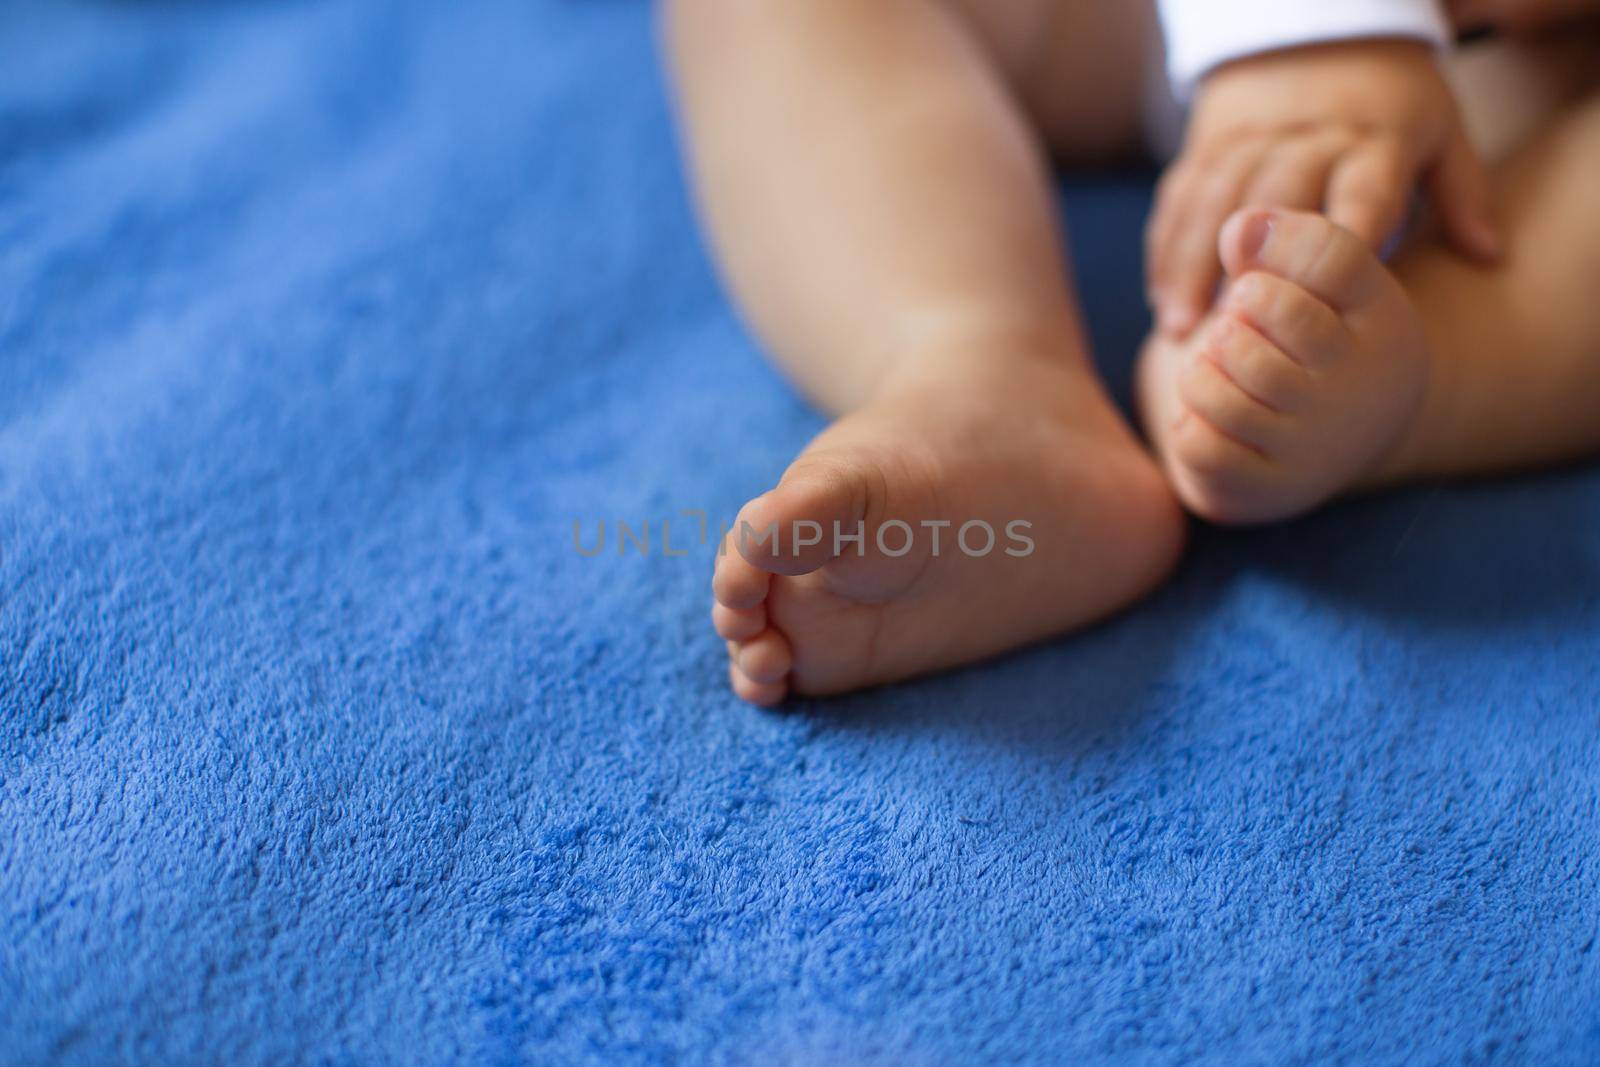 Baby legs on the bed by lanser314